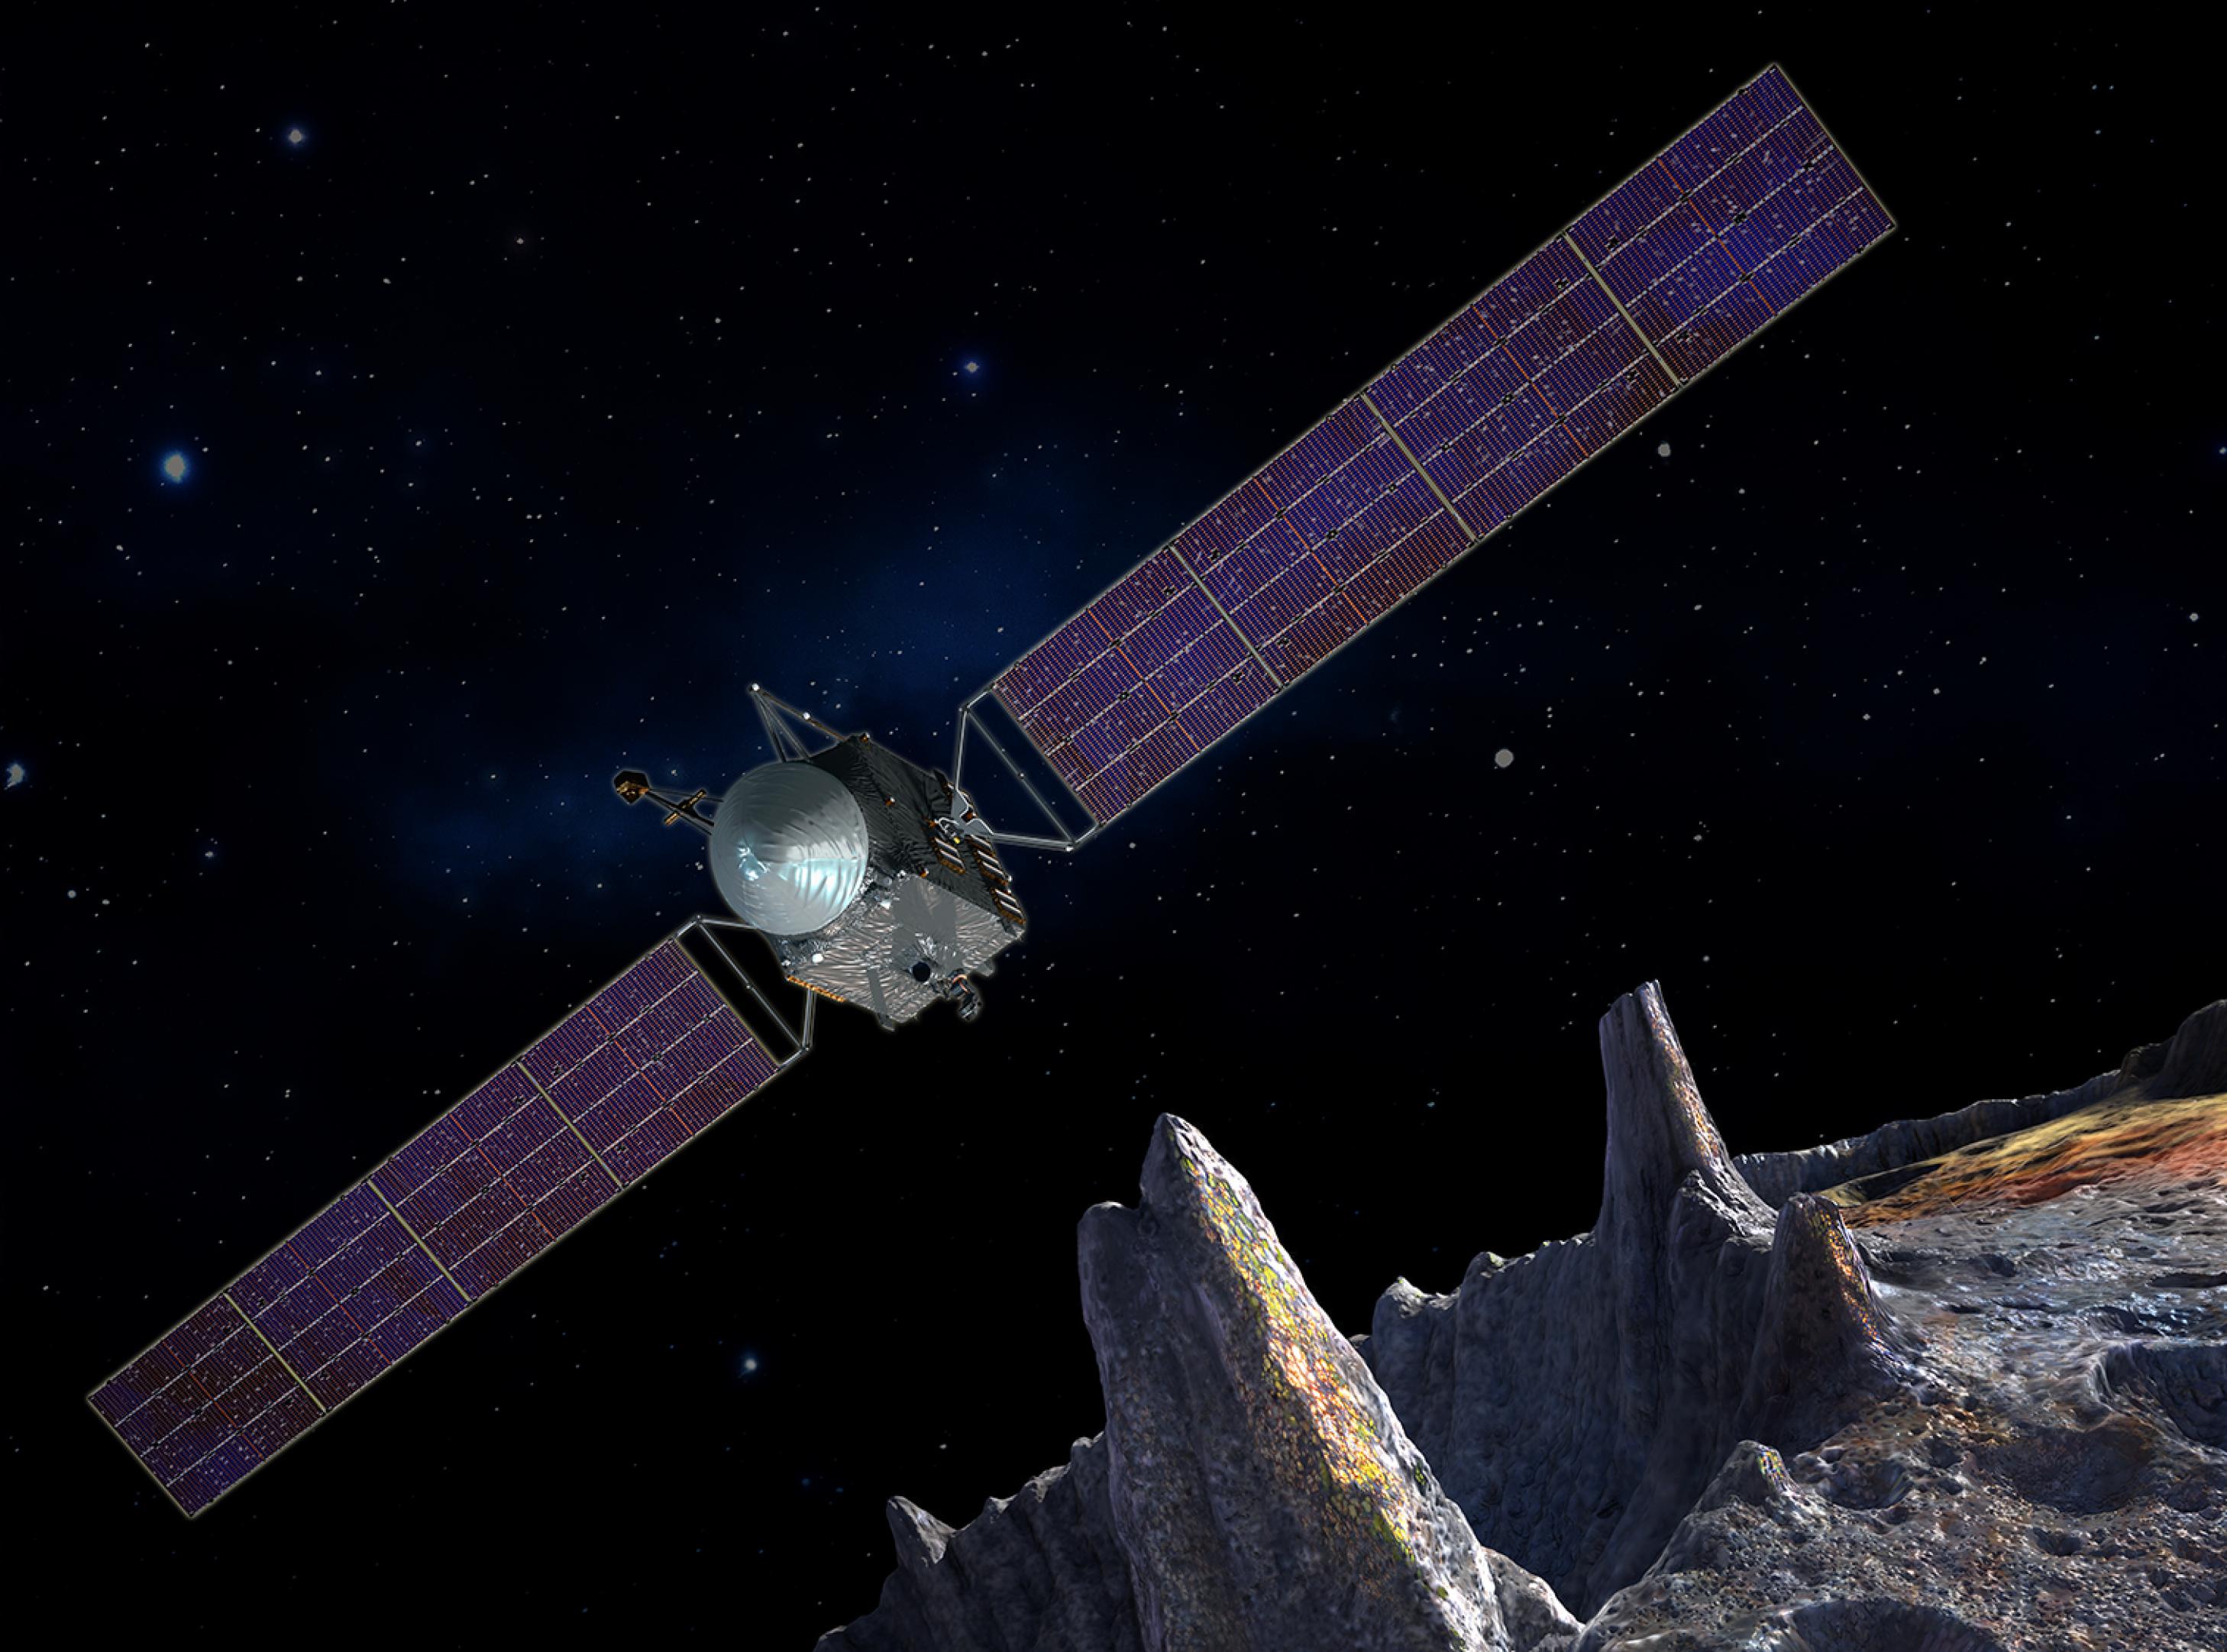 An illustration of the Psyche spacecraft with its solar panels extended flying over asteroid Psyche.